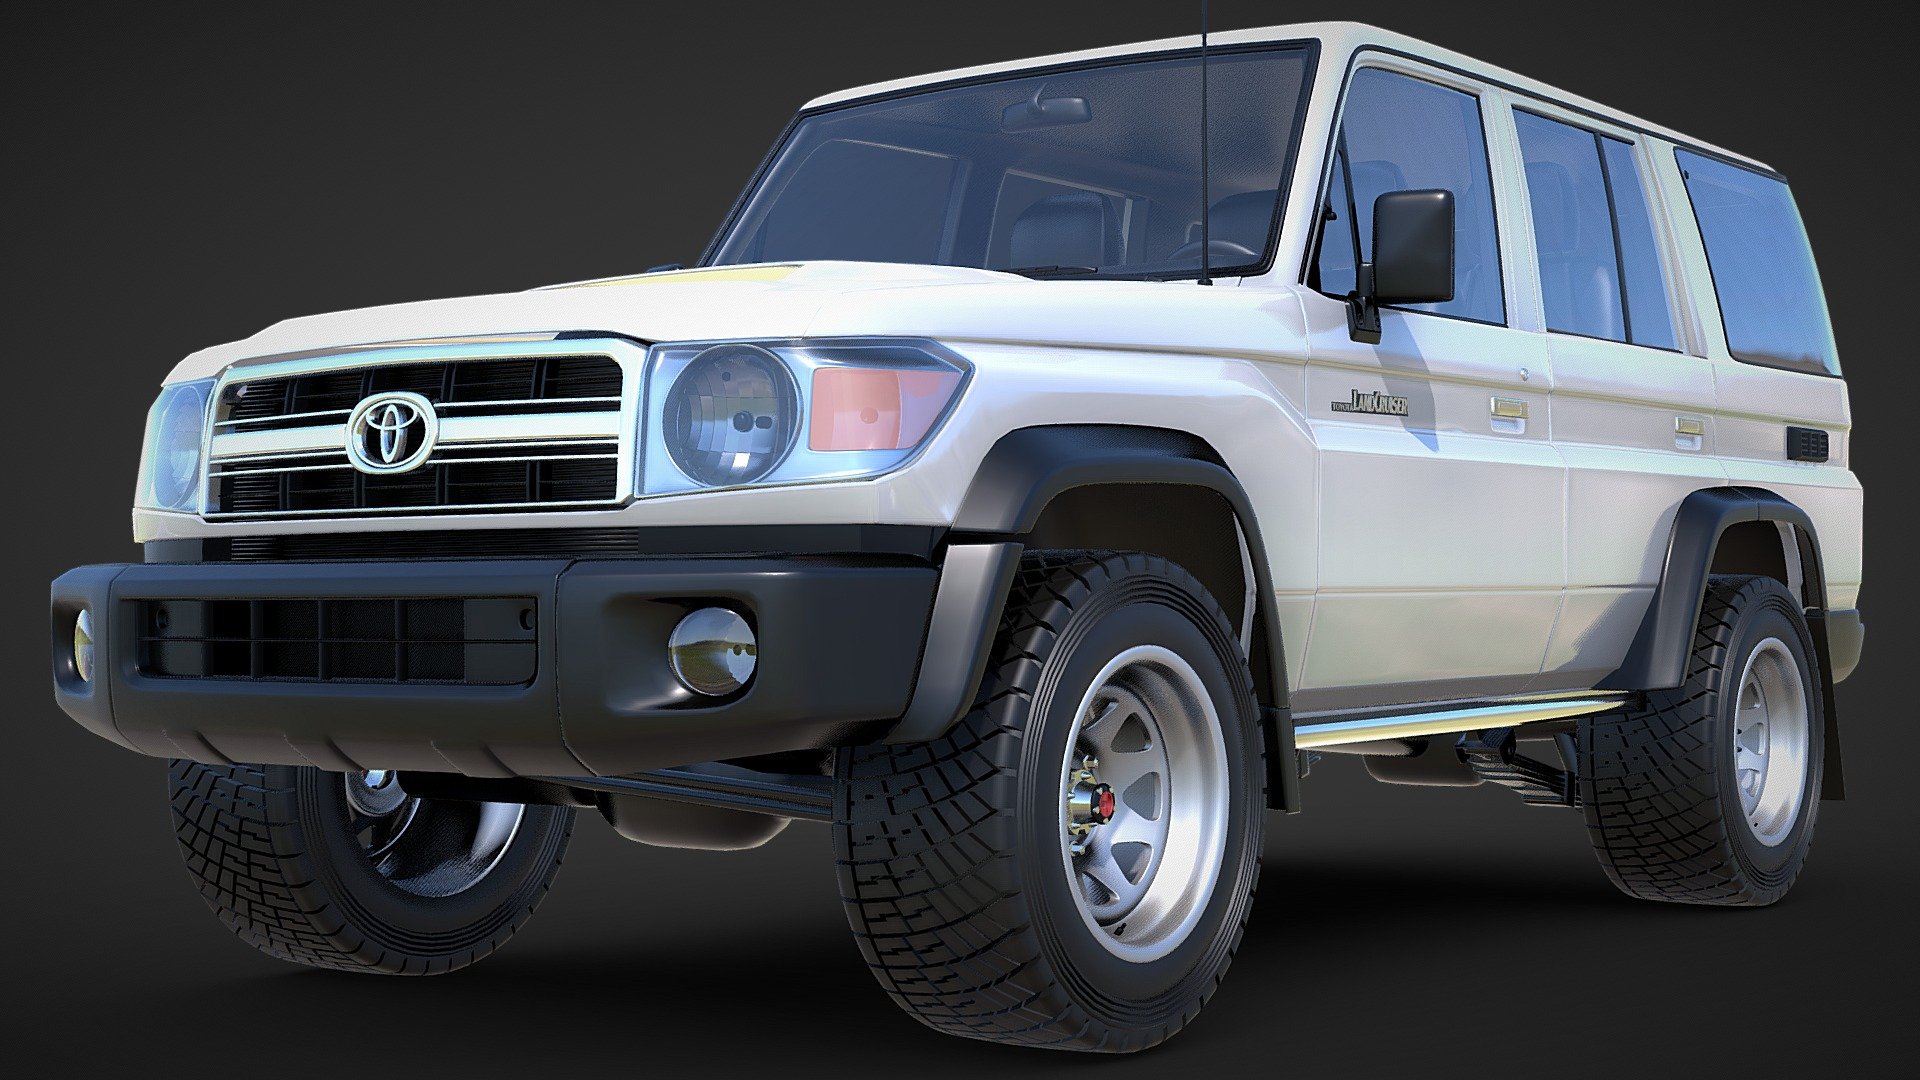 79 Series Single Cab Stock Variation - Toyota Land Cruiser 76 Series Wagon Stock - Buy Royalty Free 3D model by Pitstop 3D (@Pitstop3D) 3d model